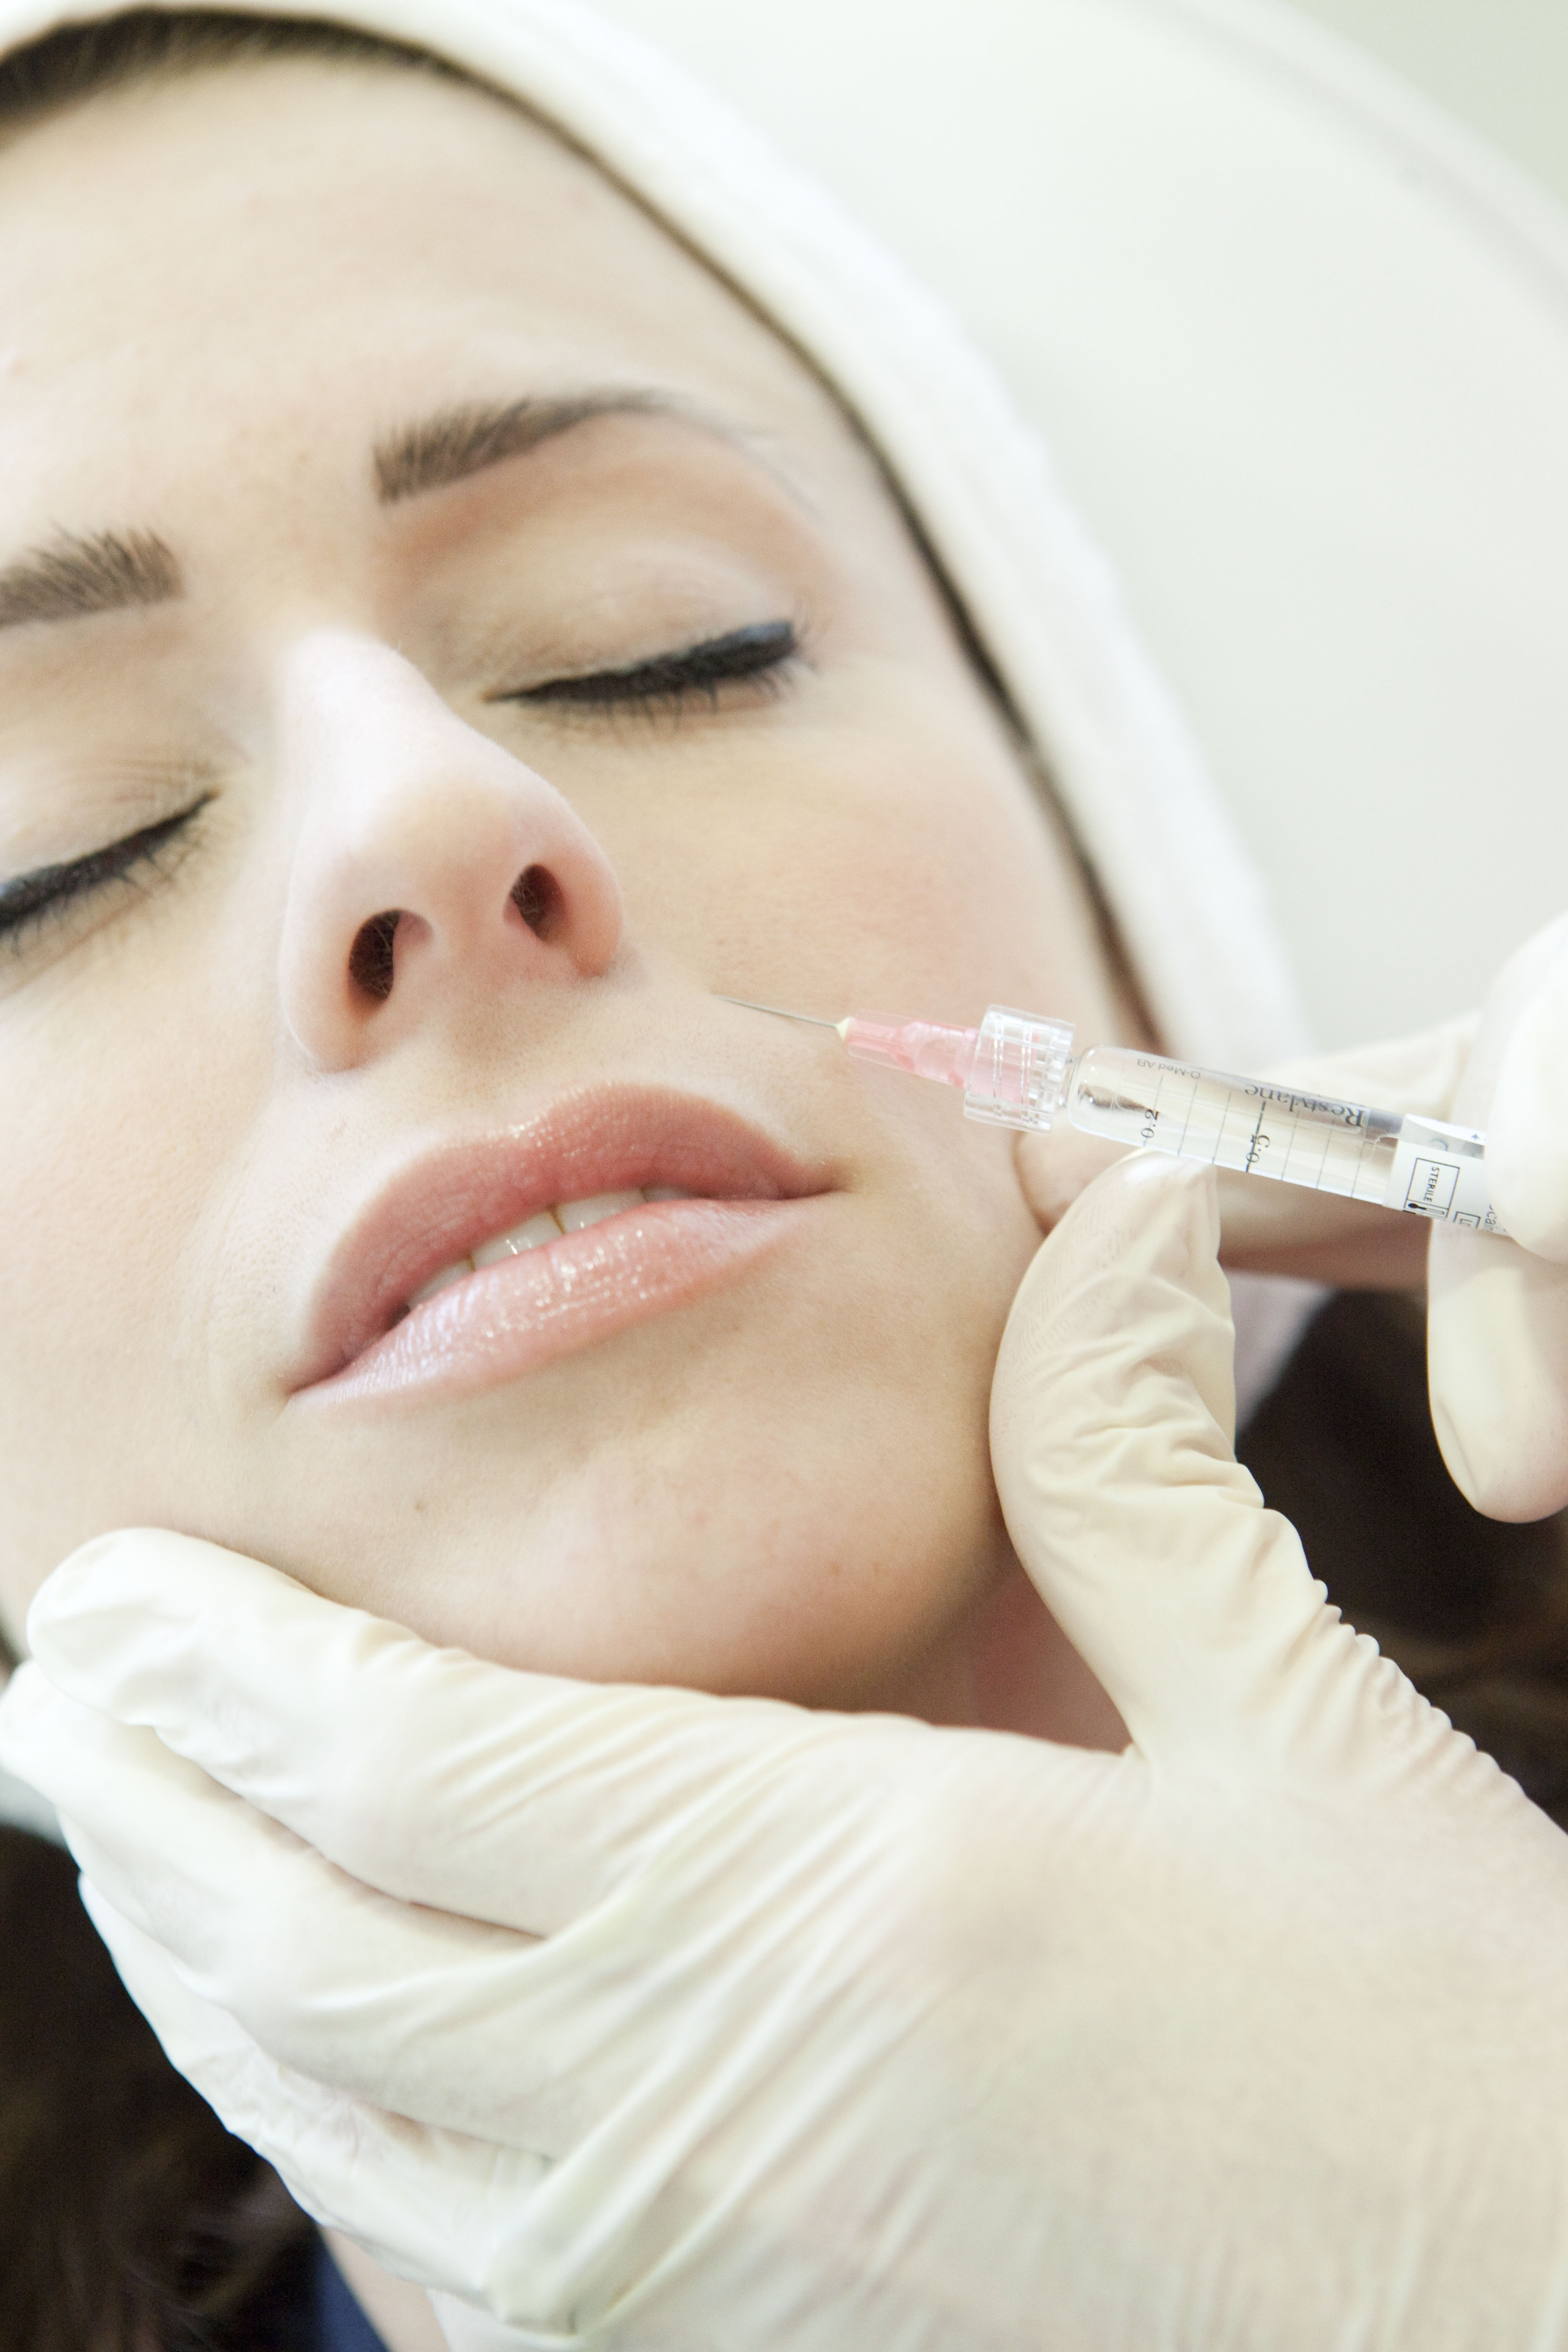 Superdrug introducing a ‘botox’ service – good or bad?